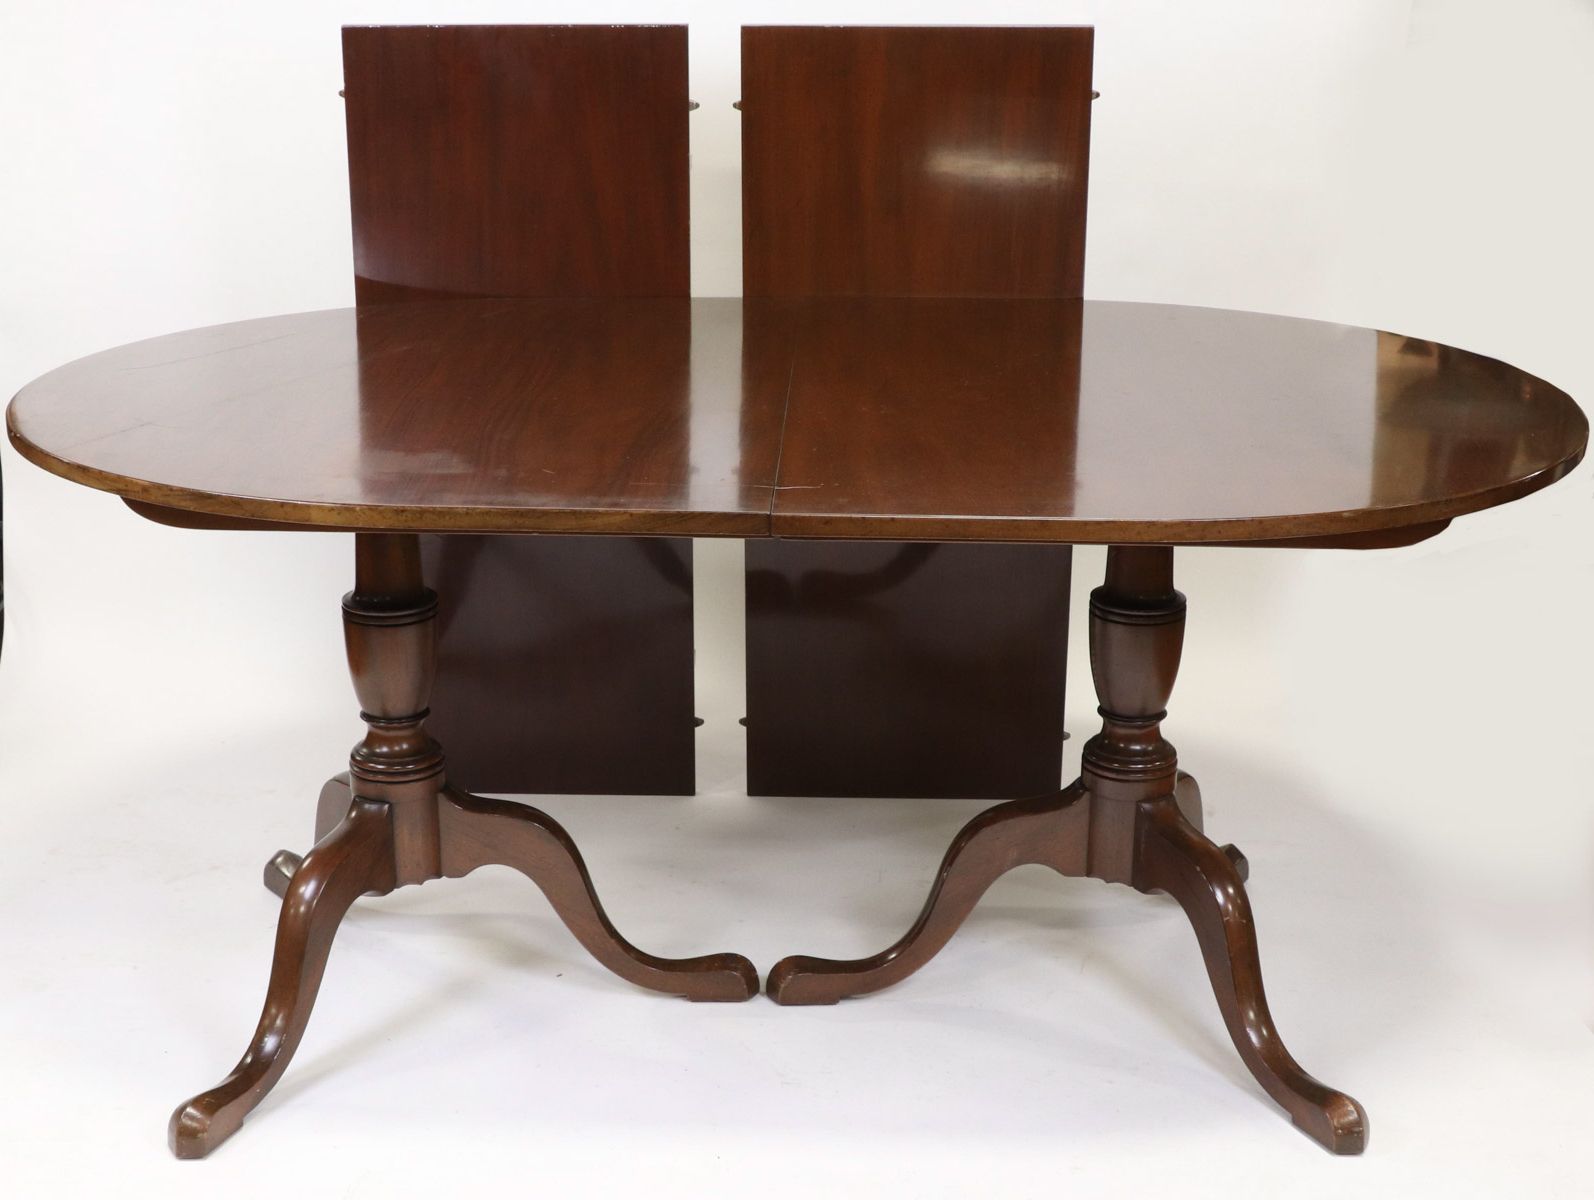 Widely Used Mahogany Dining Tables In Lot Detail – Double Pedestal Mahogany Dining Table (View 9 of 20)